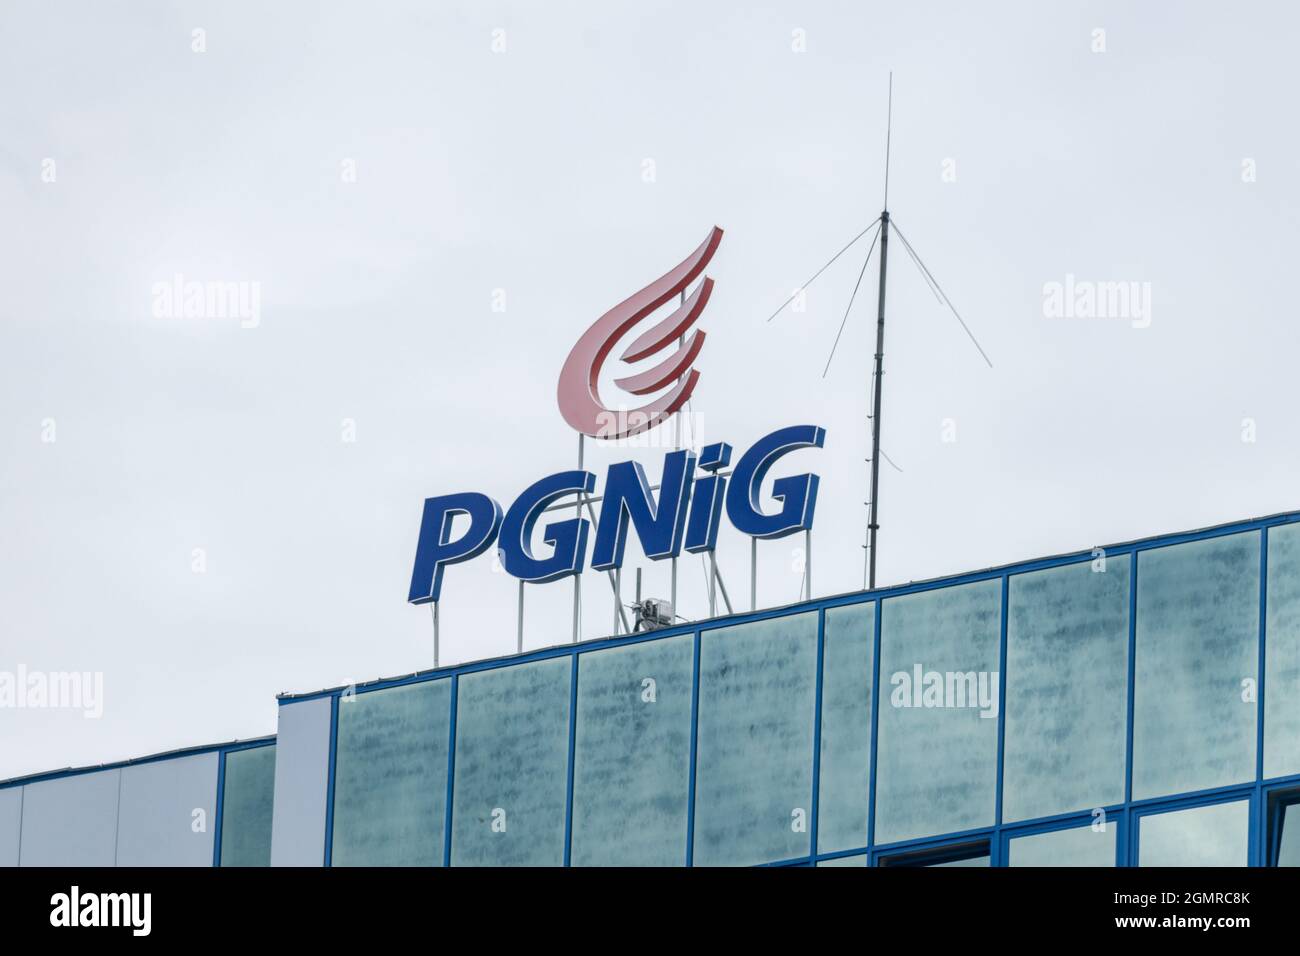 Zielona Gora, Poland - June 1, 2021: Logo and sign of PGNiG. PGNiG is Polskie Gornictwo Naftowe i Gazownictwo S.A. (English: Polish Oil Mining and Gas Stock Photo